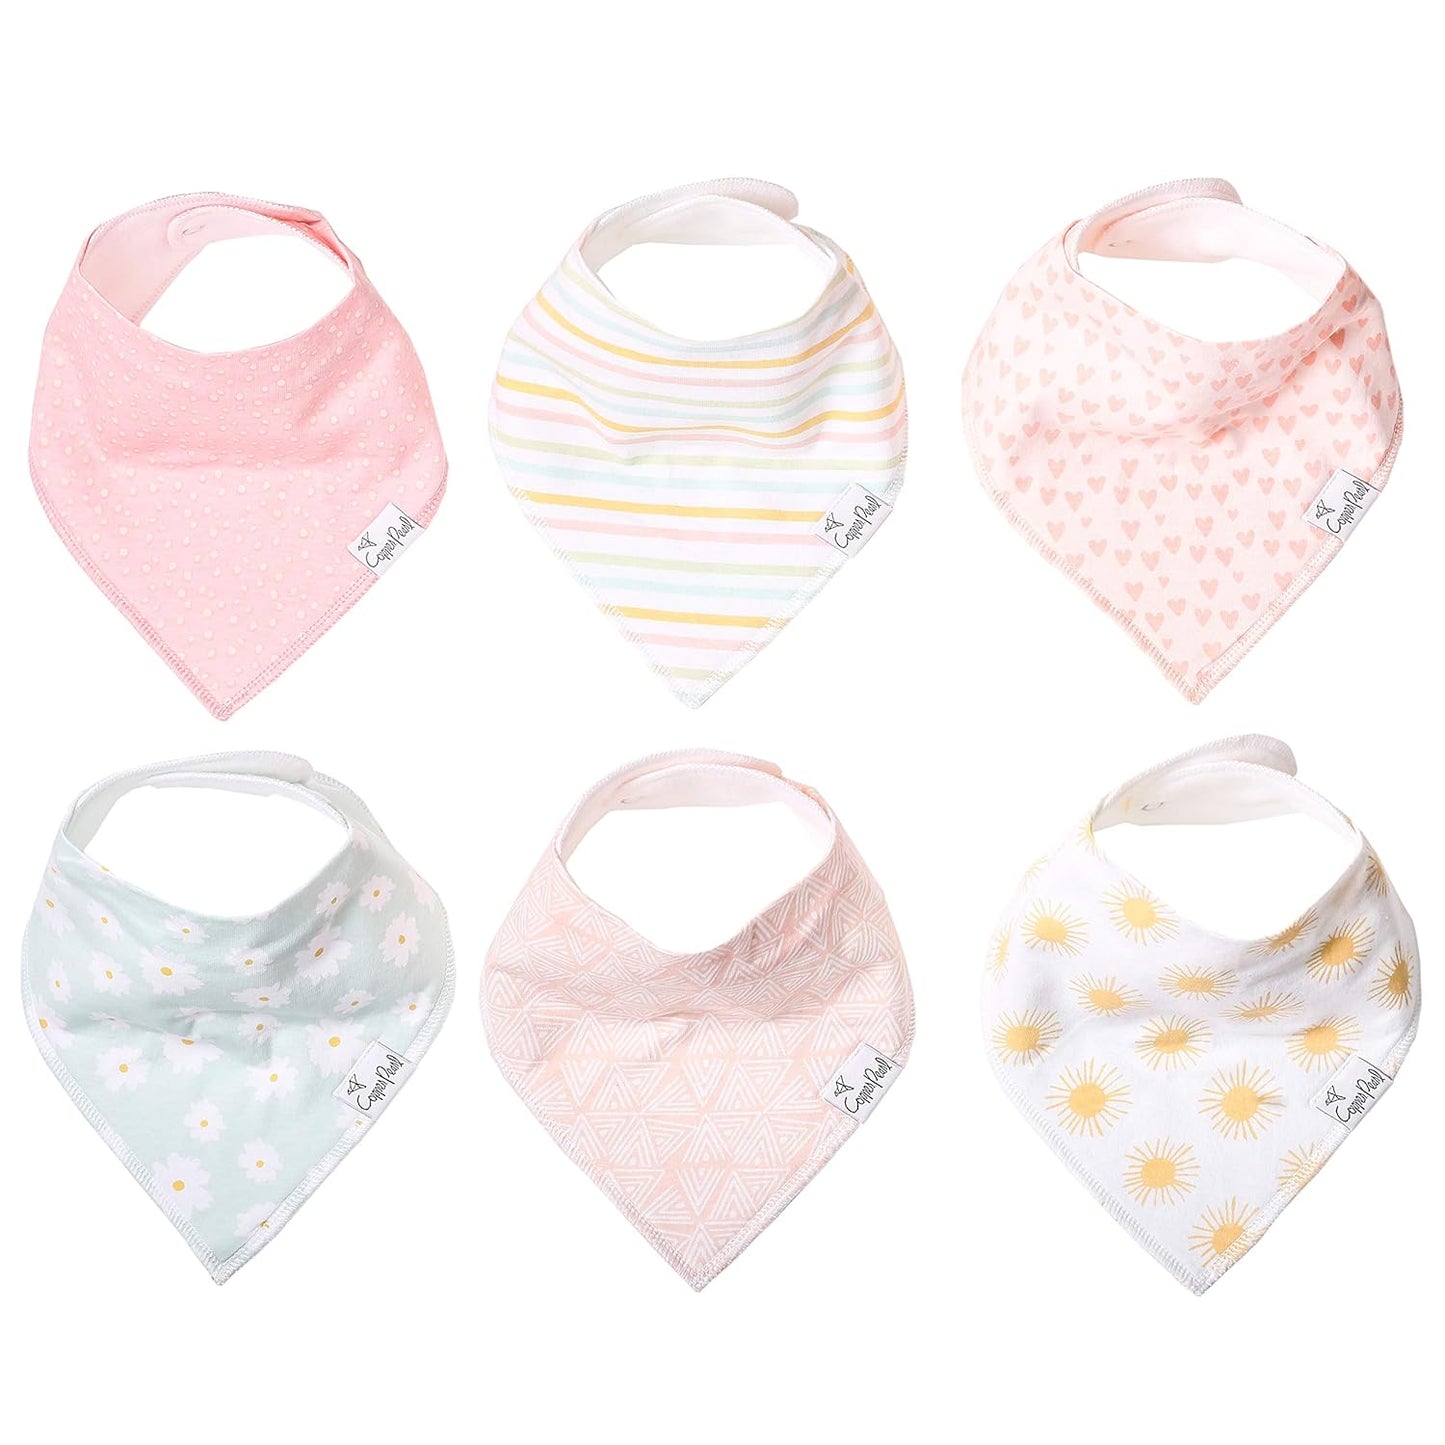 Copper Pearl Baby Bandana Drool Bibs for Drooling and Teething 6 Pack Gift Set For Boys “Rider